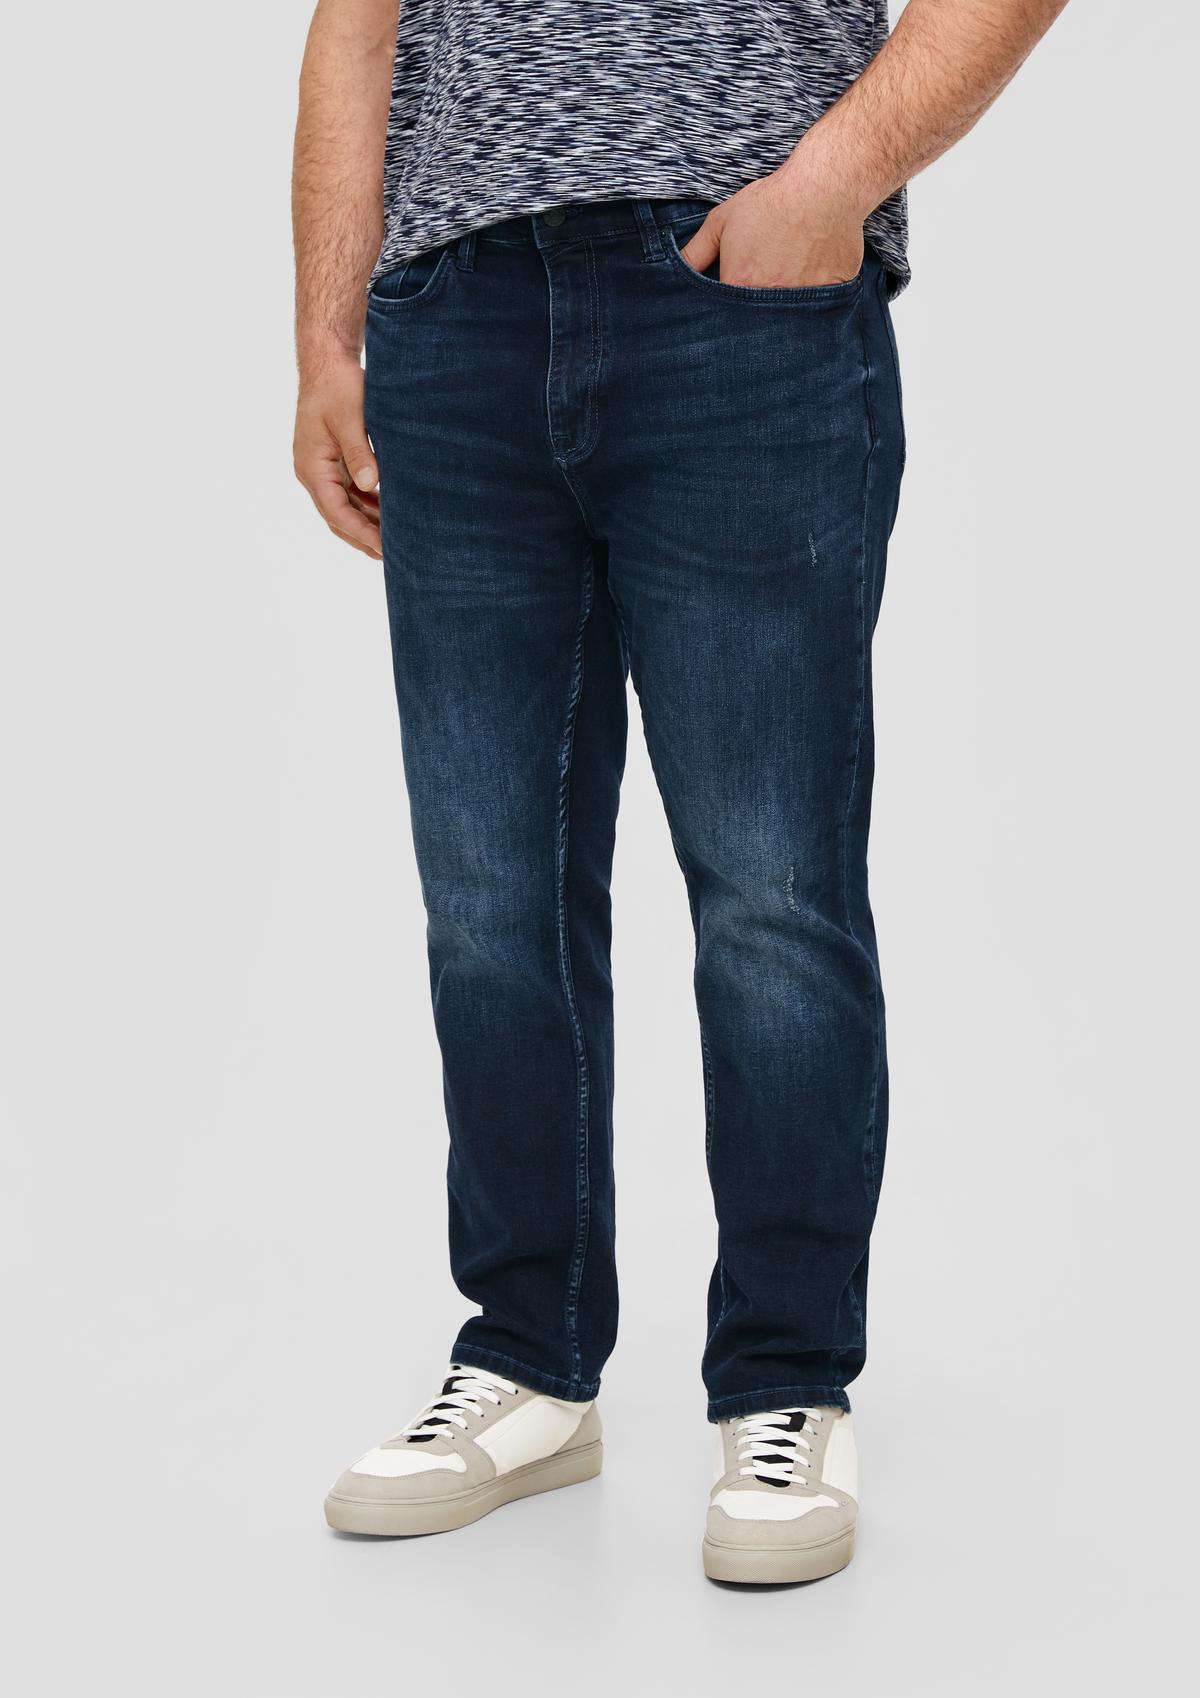 Jeans Casby / relaxed fit / mid rise / straight leg